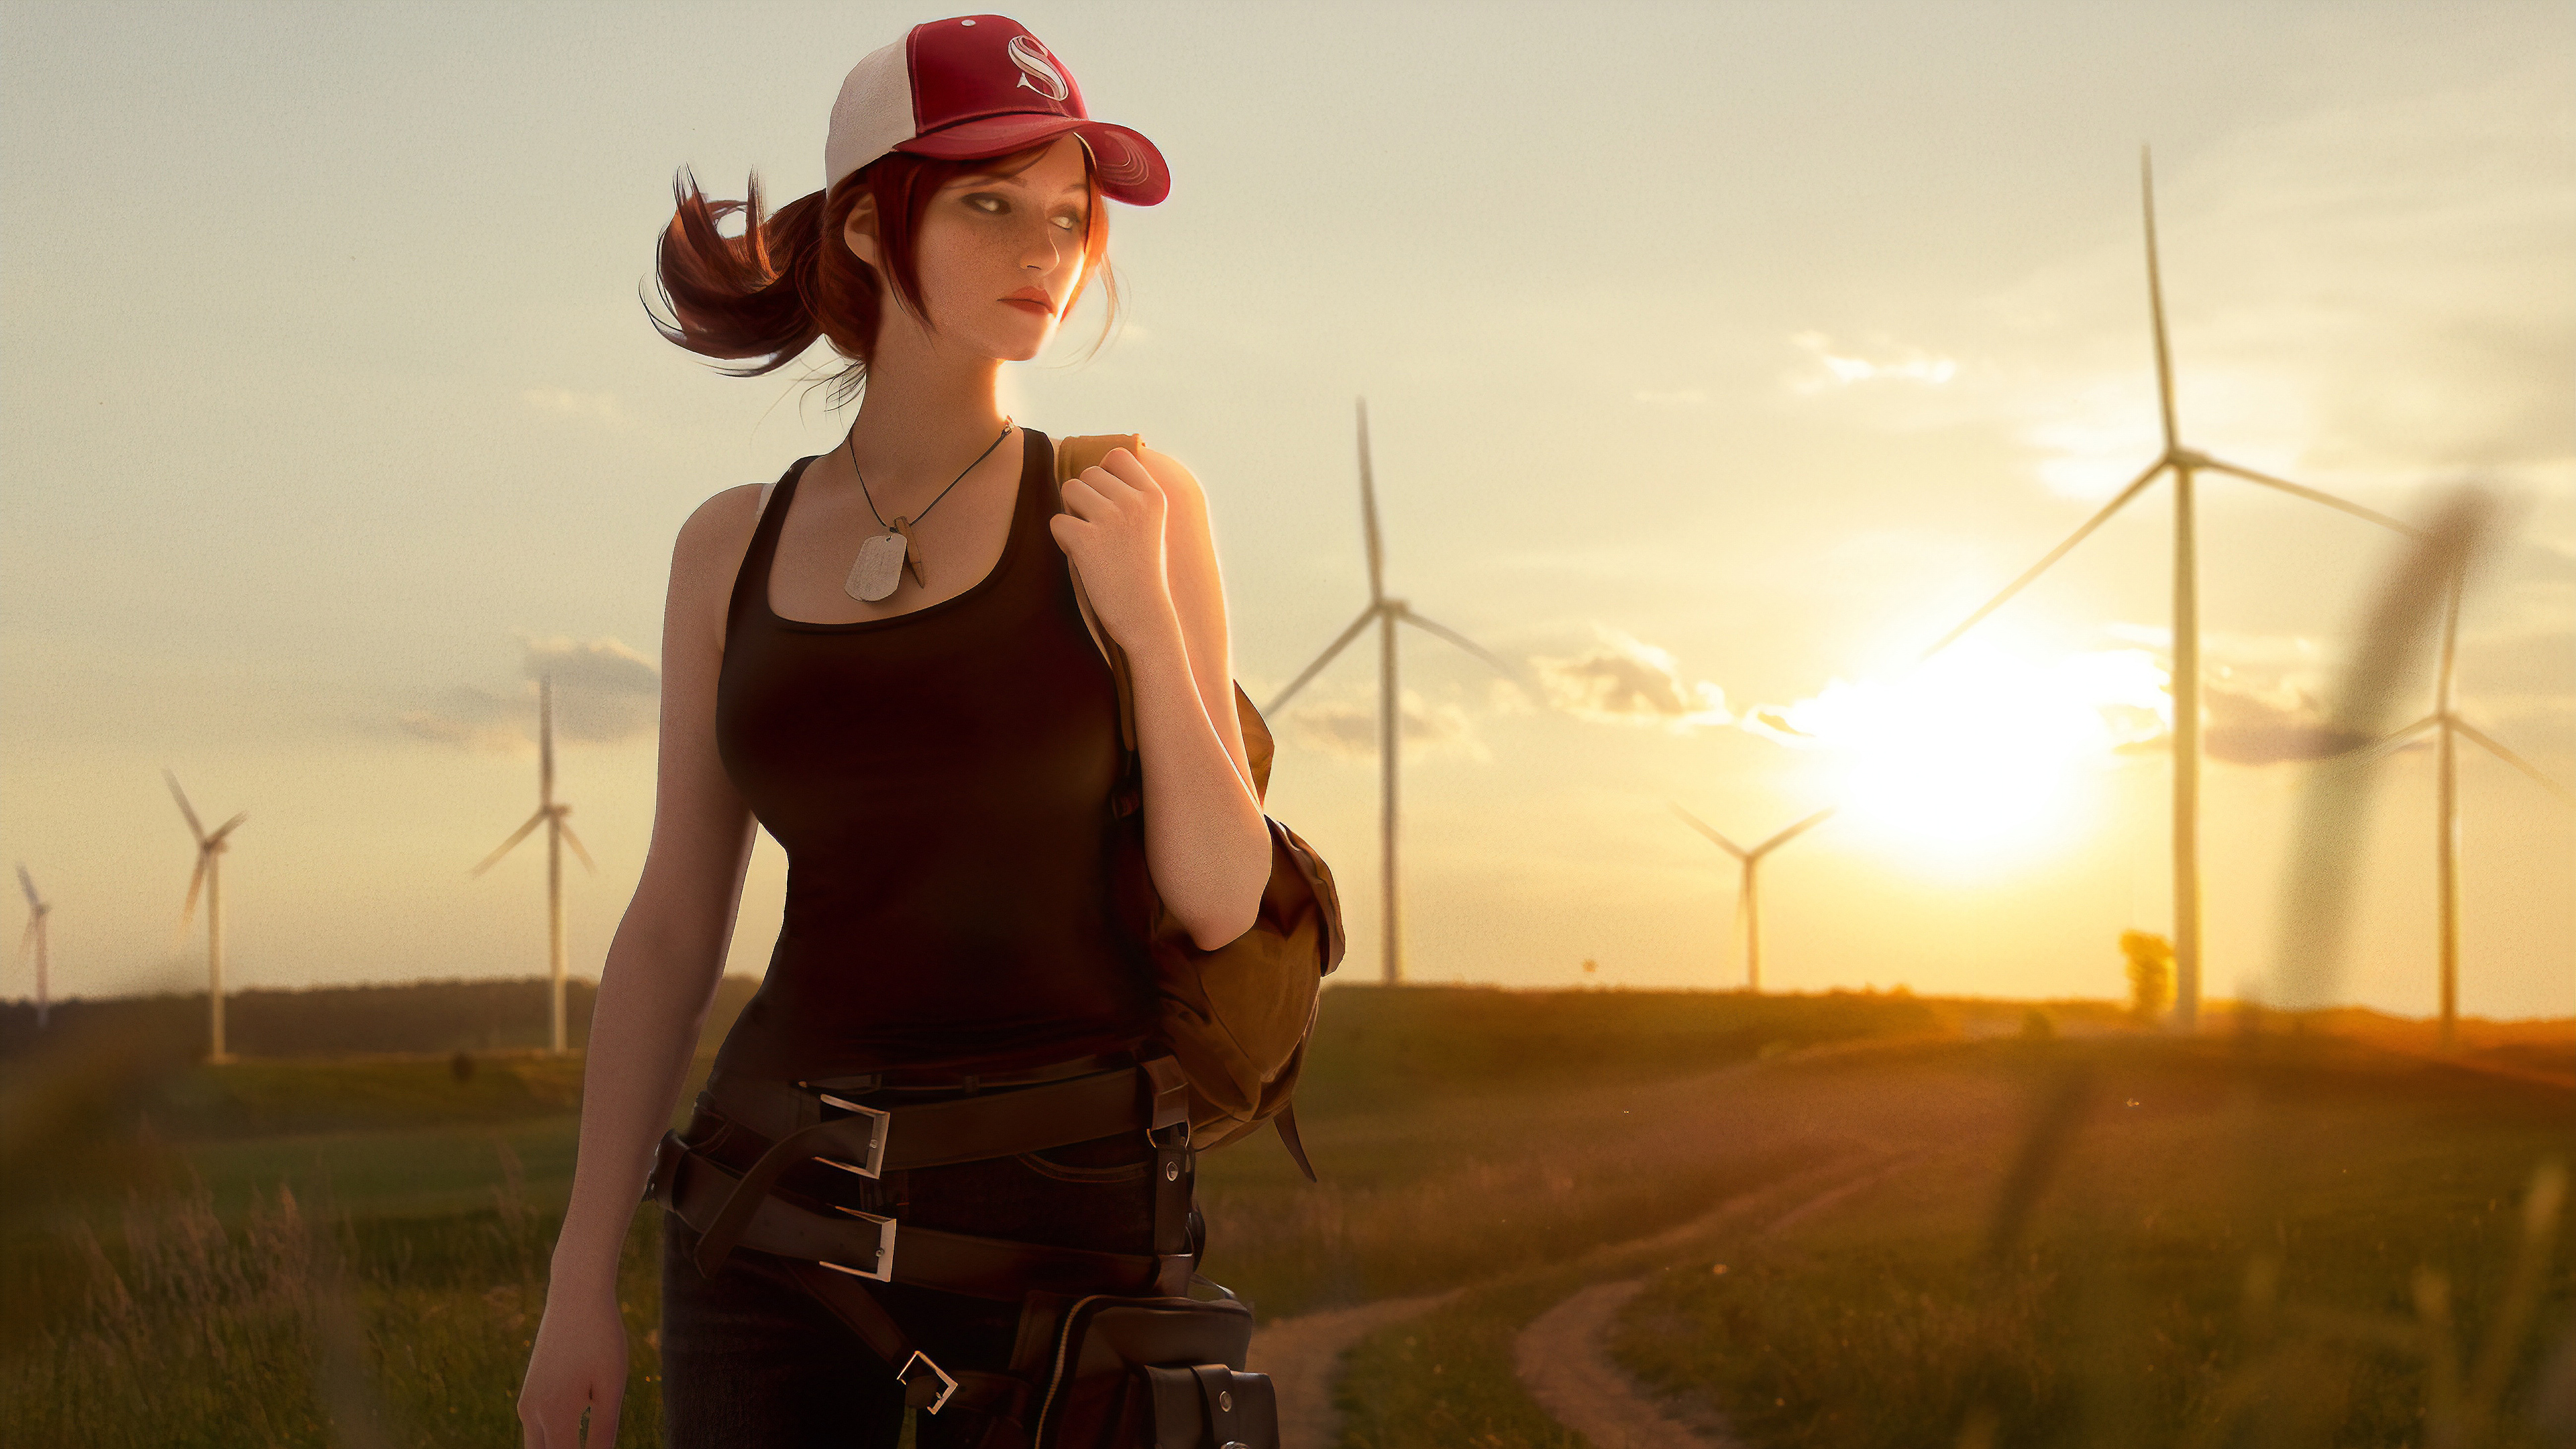  Pubg  Girl  Cosplay 4k  2021 HD  Games 4k  Wallpapers  Images 